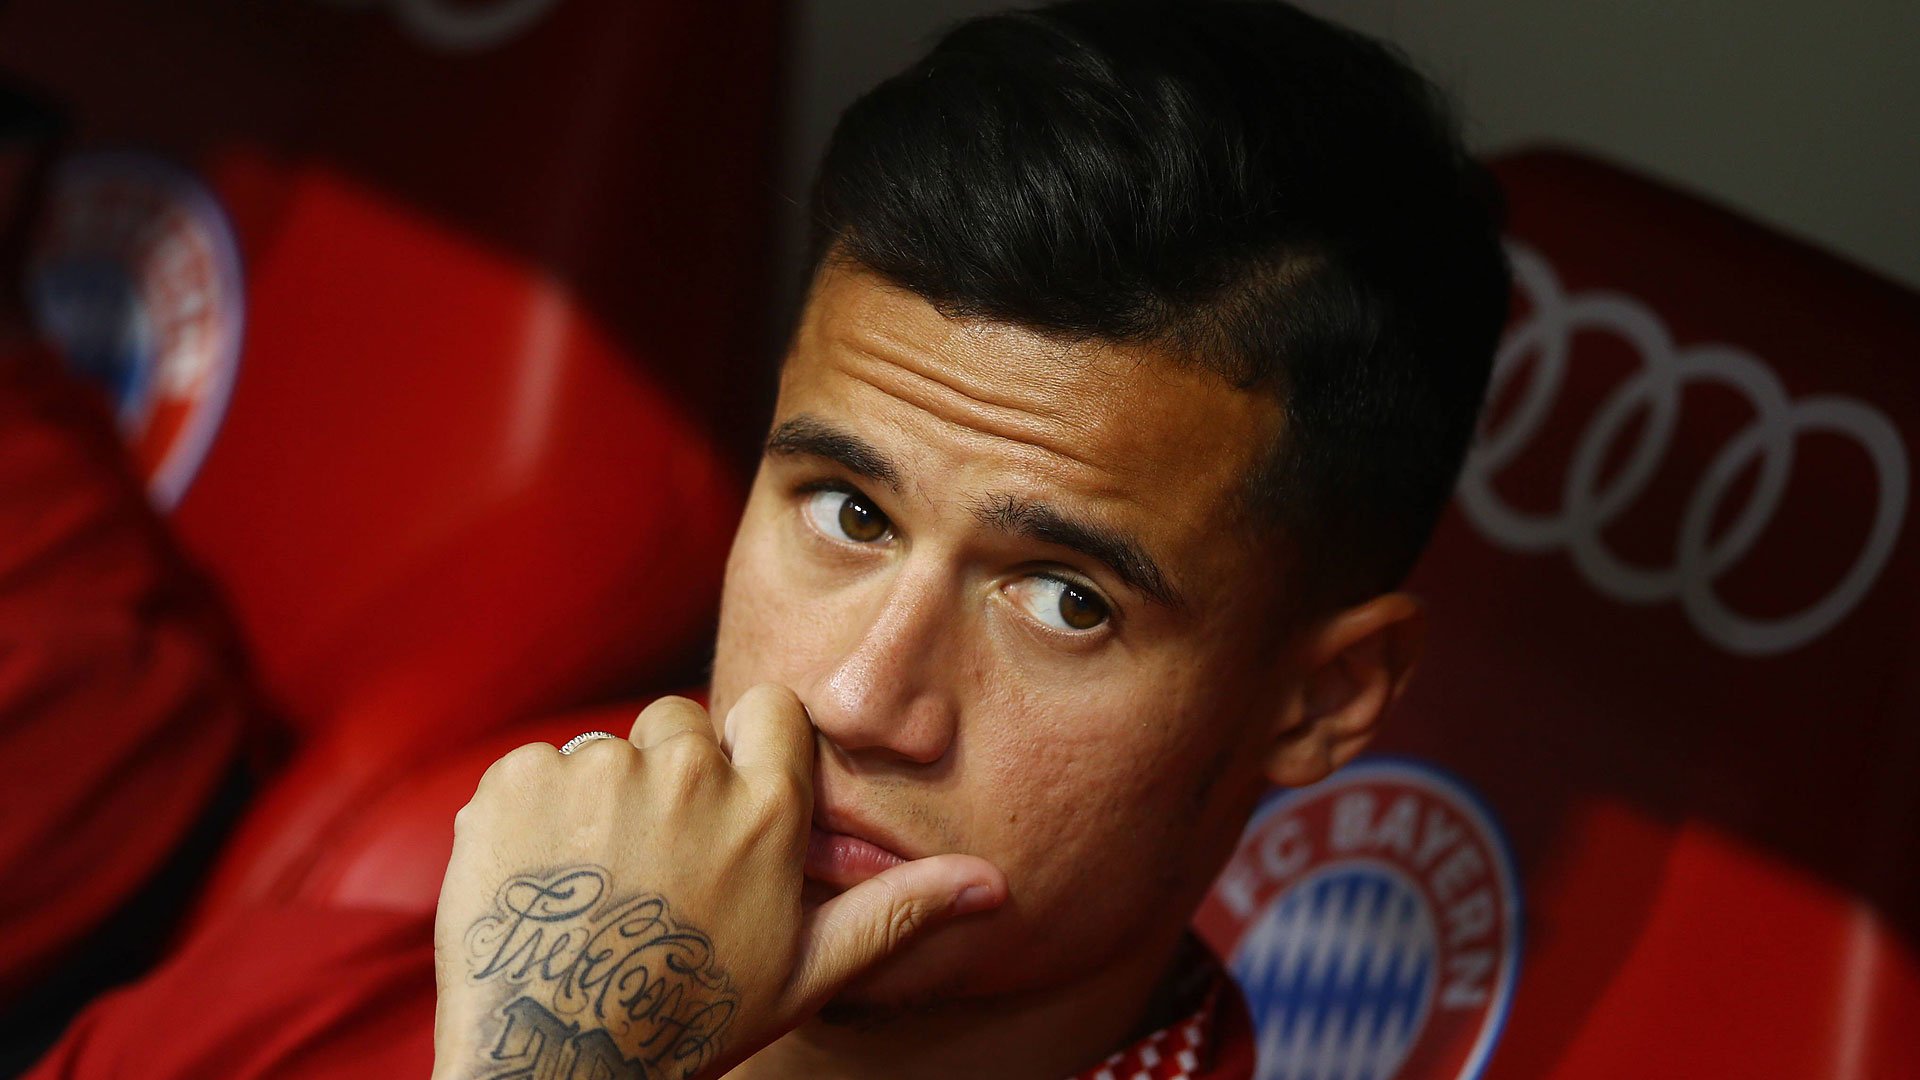 Bayern Munich confirm deal for former Liverpool star Philippe Coutinho from Barcelona - Bóng Đá